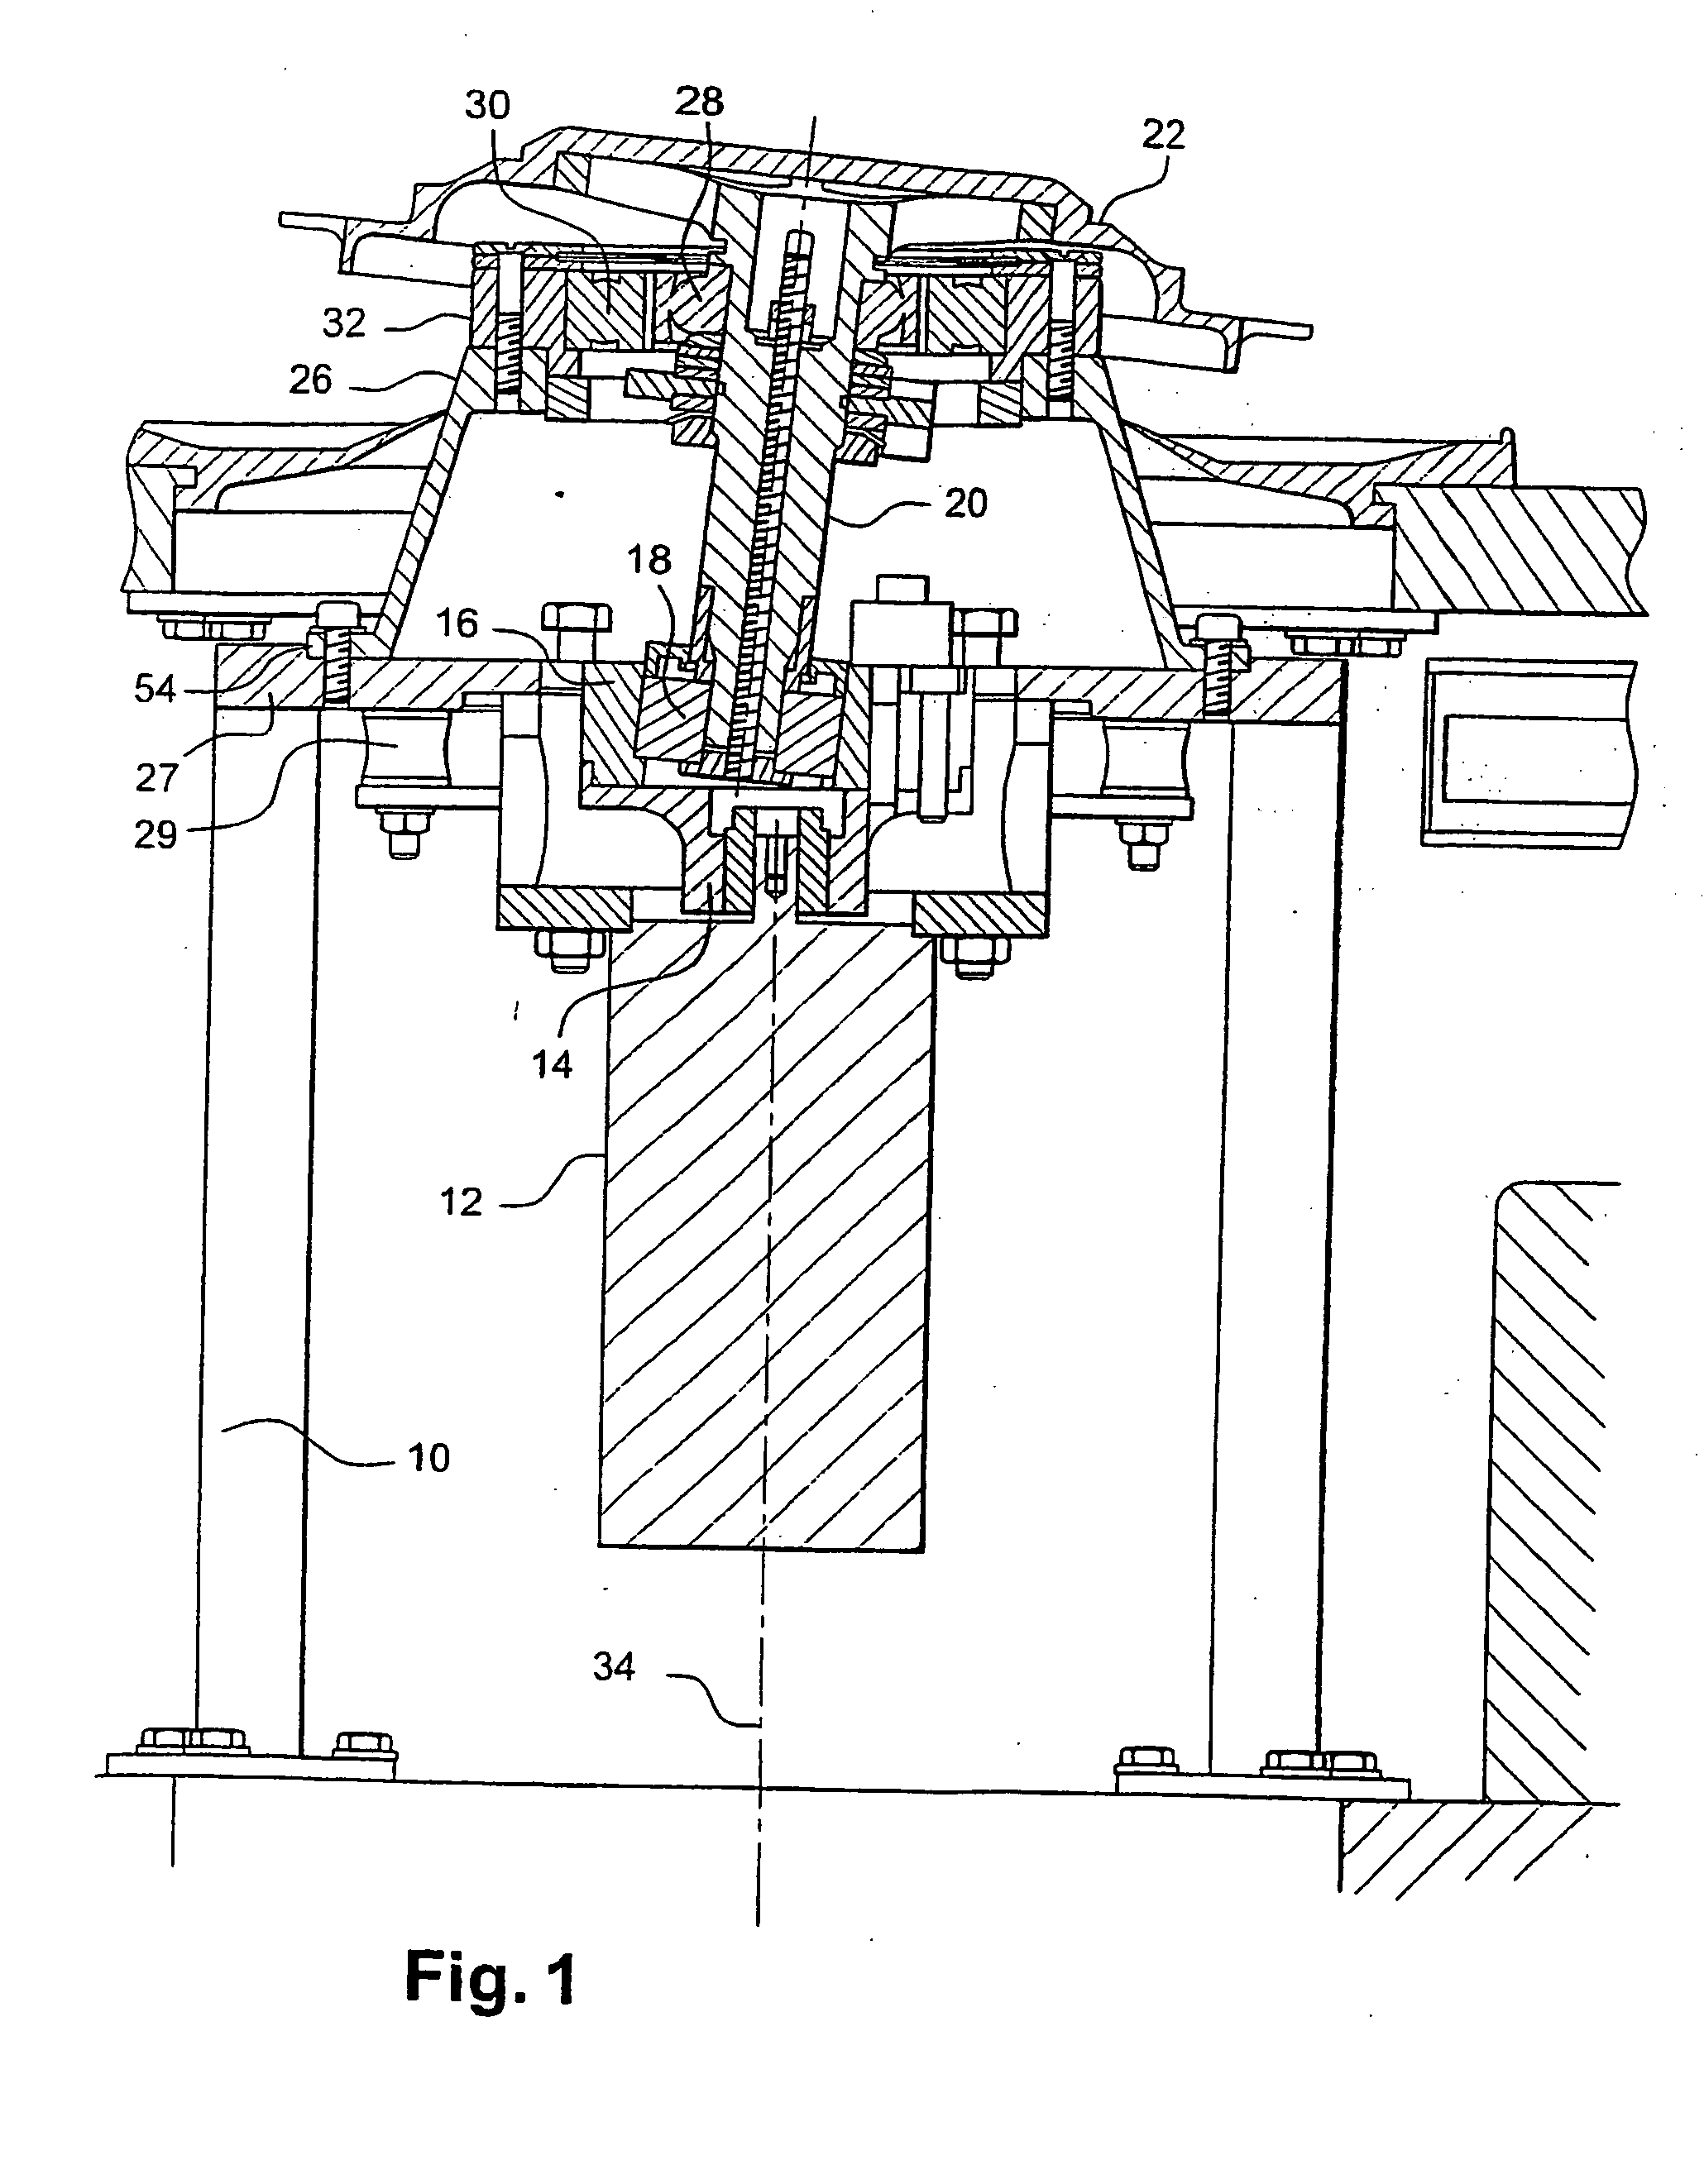 Device for fast vibration of tubes containing samples